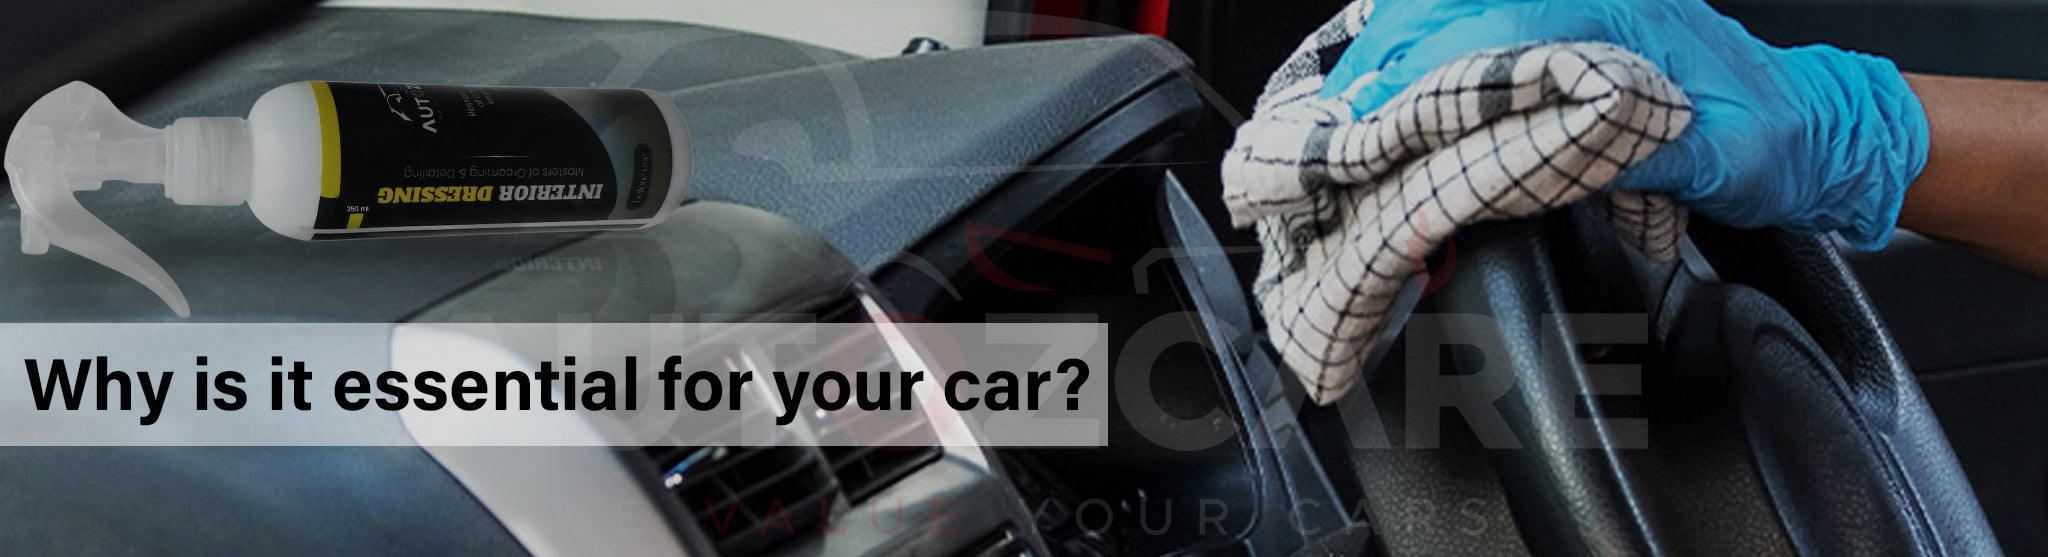 Why is it essential for your car?